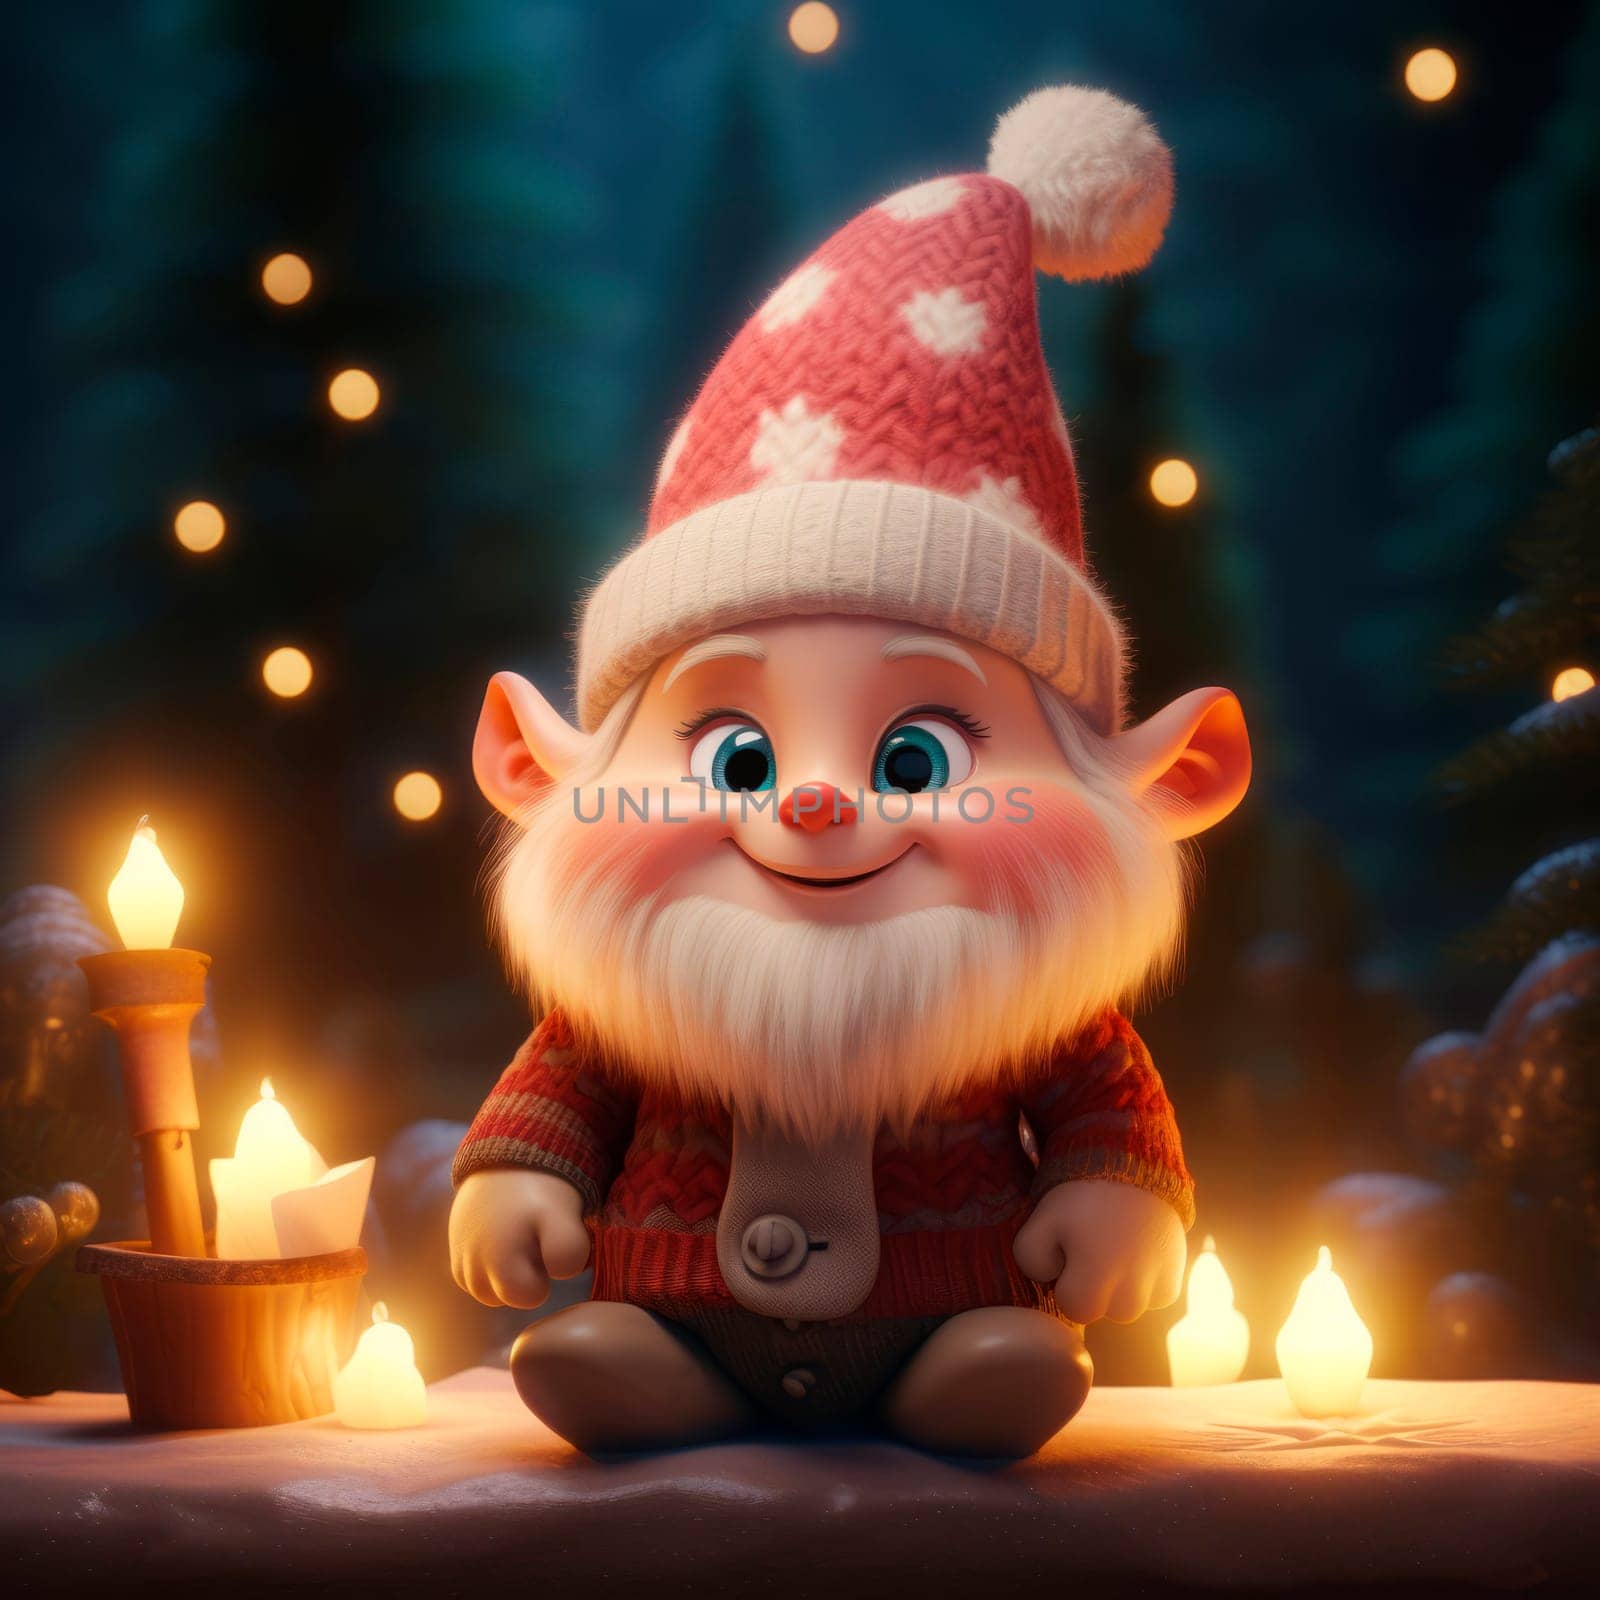 Cute Christmas Gonks on the background of a Christmas picture. High quality illustration